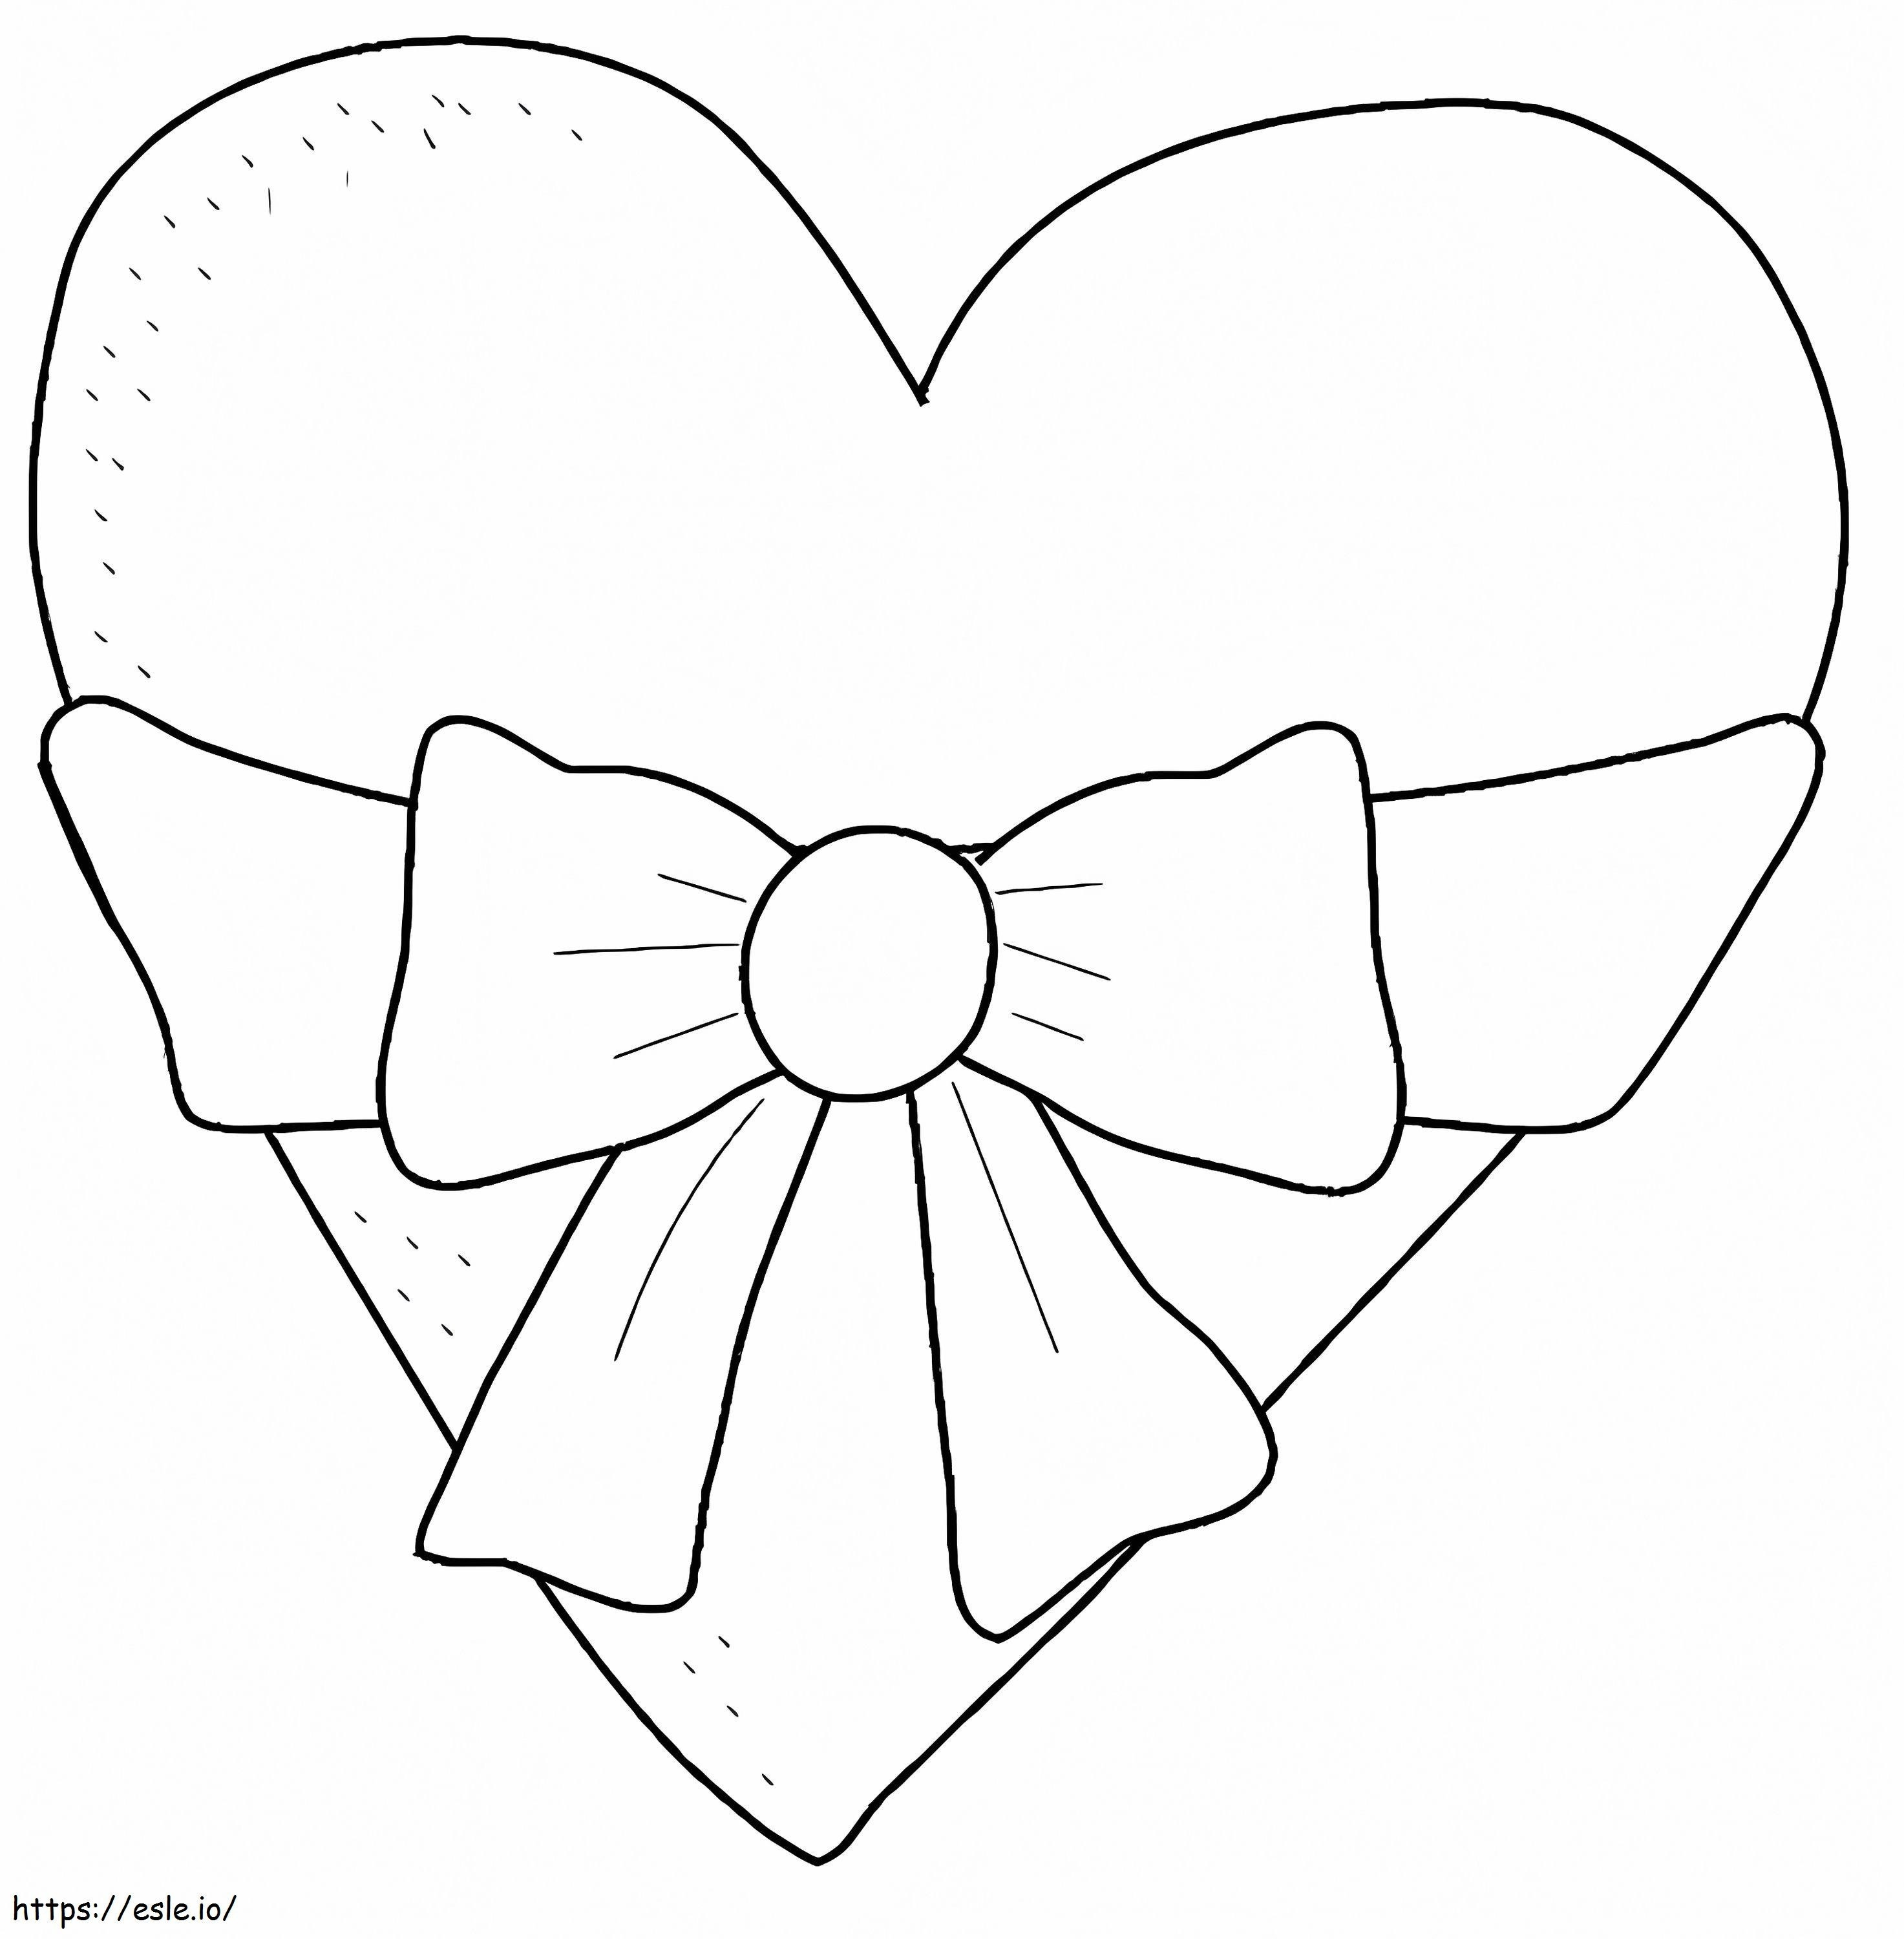 Heart With Bow coloring page